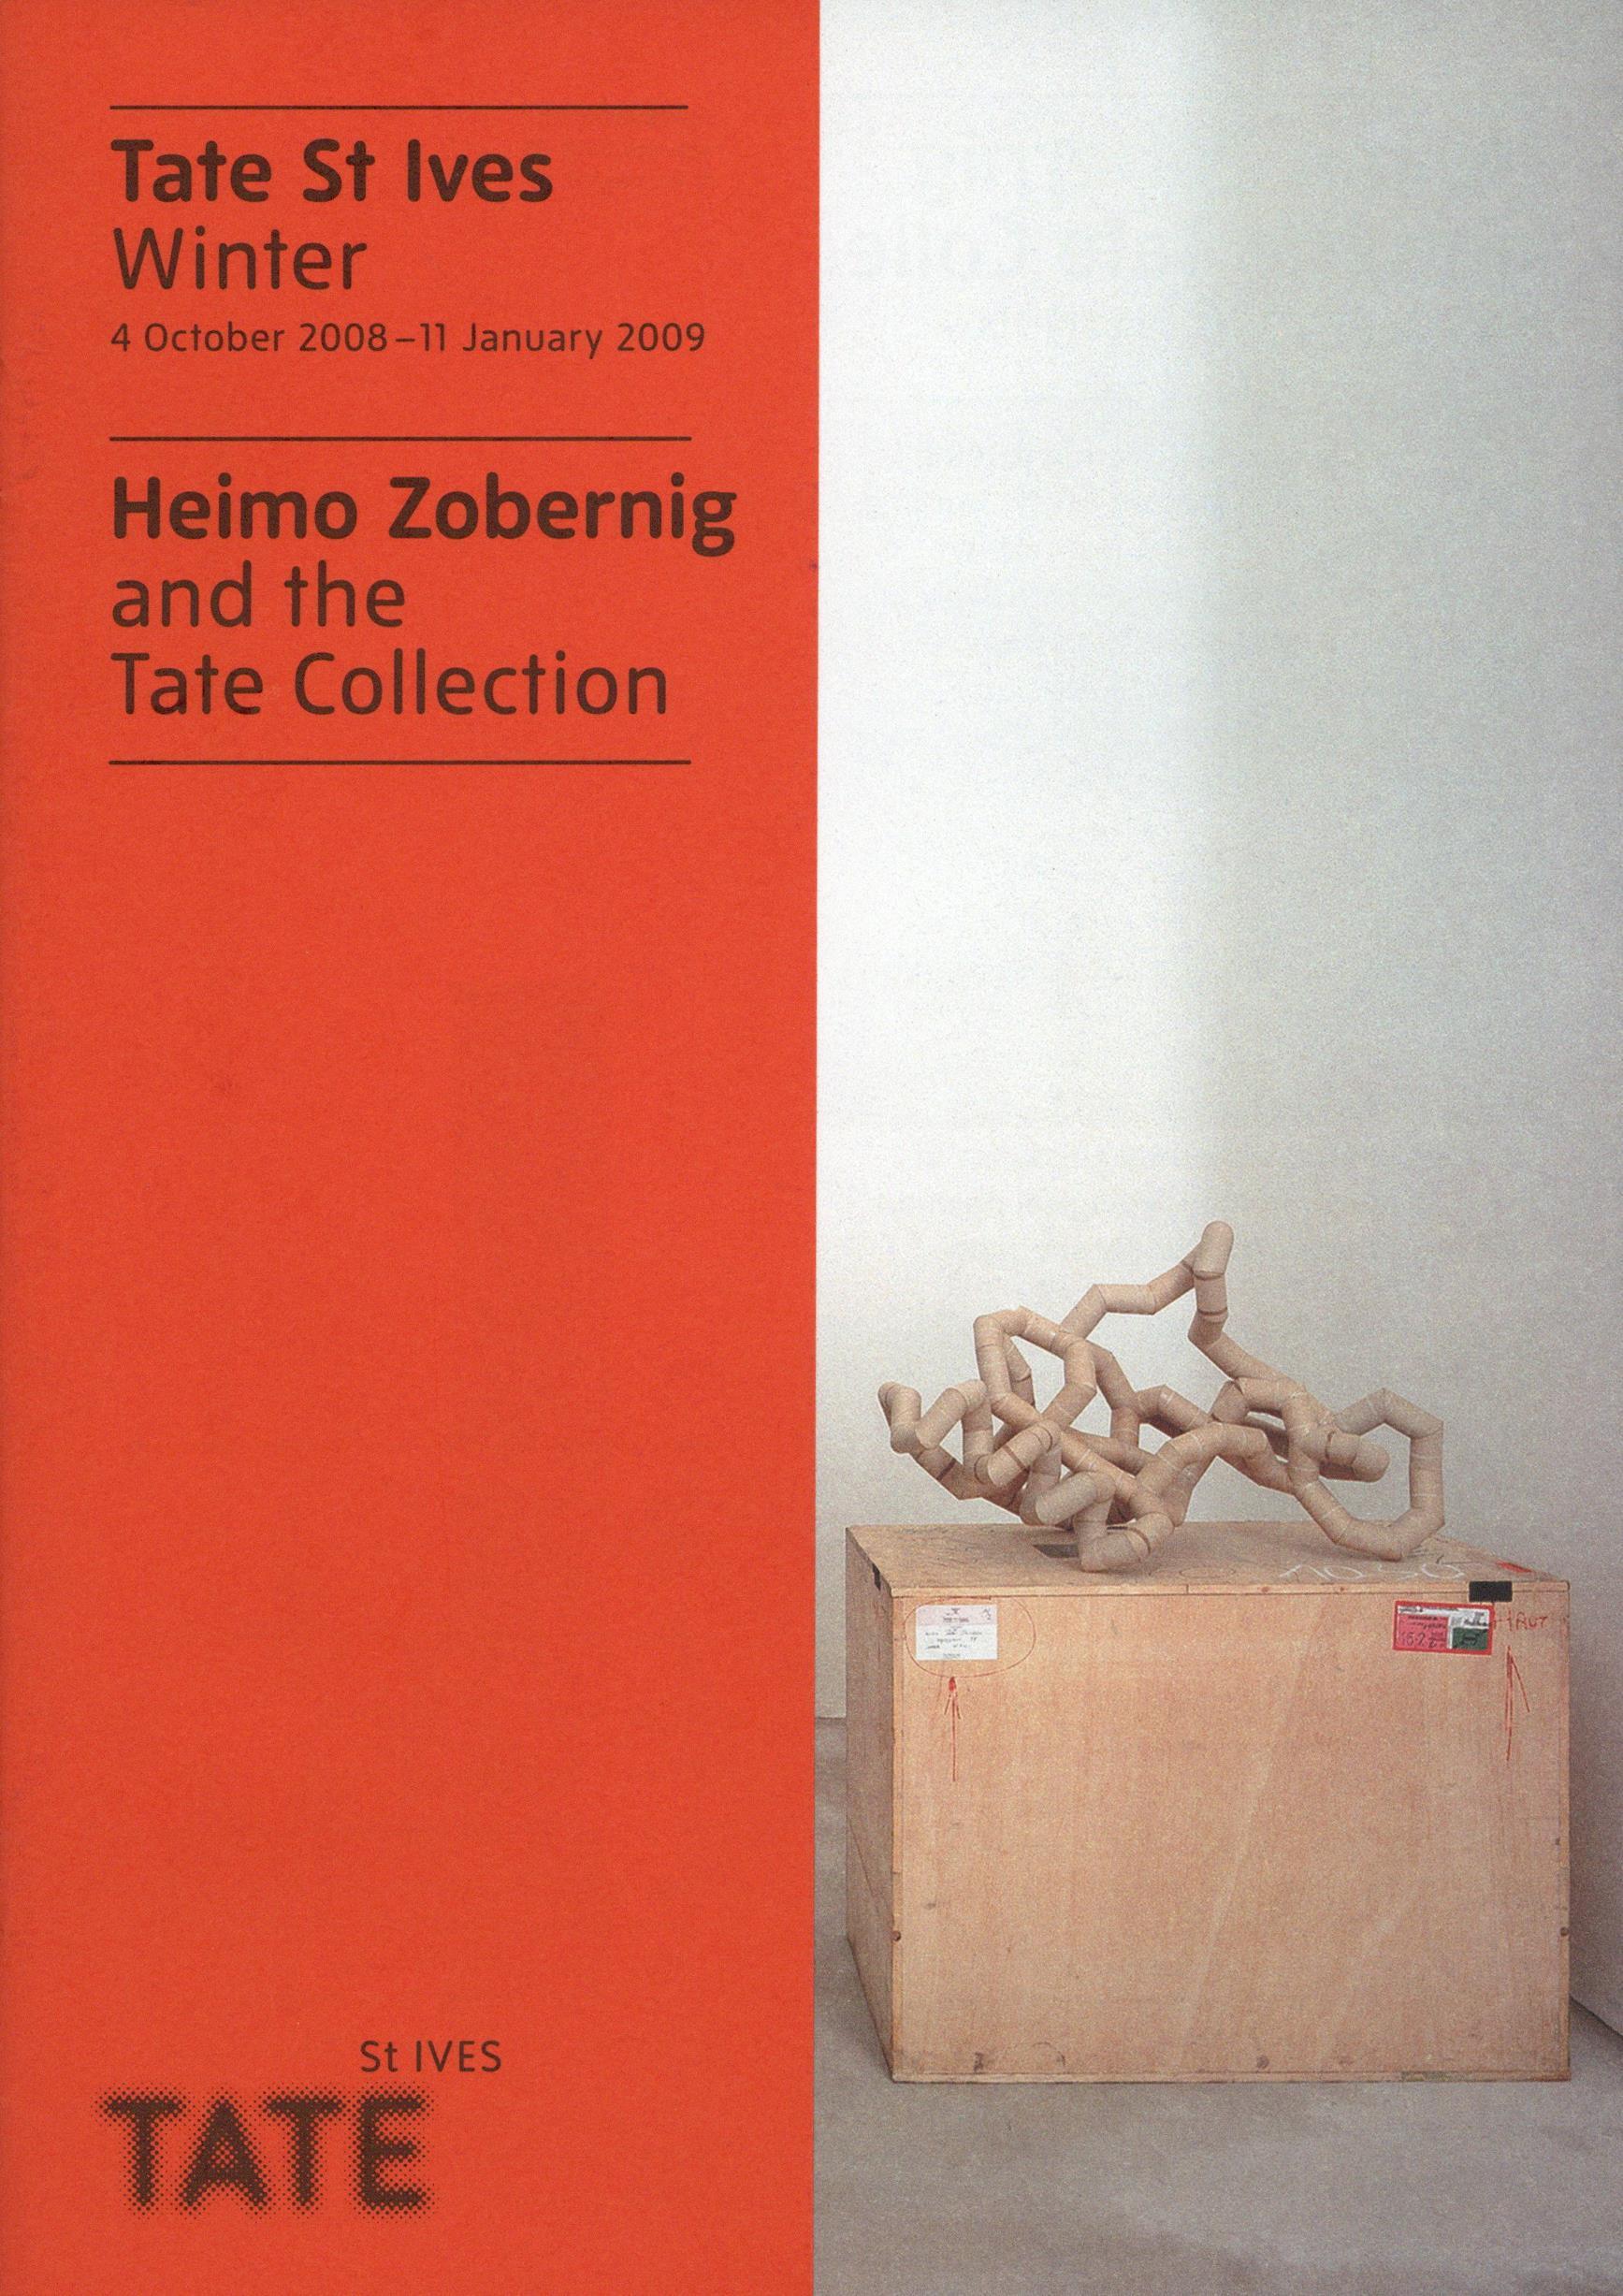 Tate St Ives. Winter. Heimo Zobernig and the Tate Collection